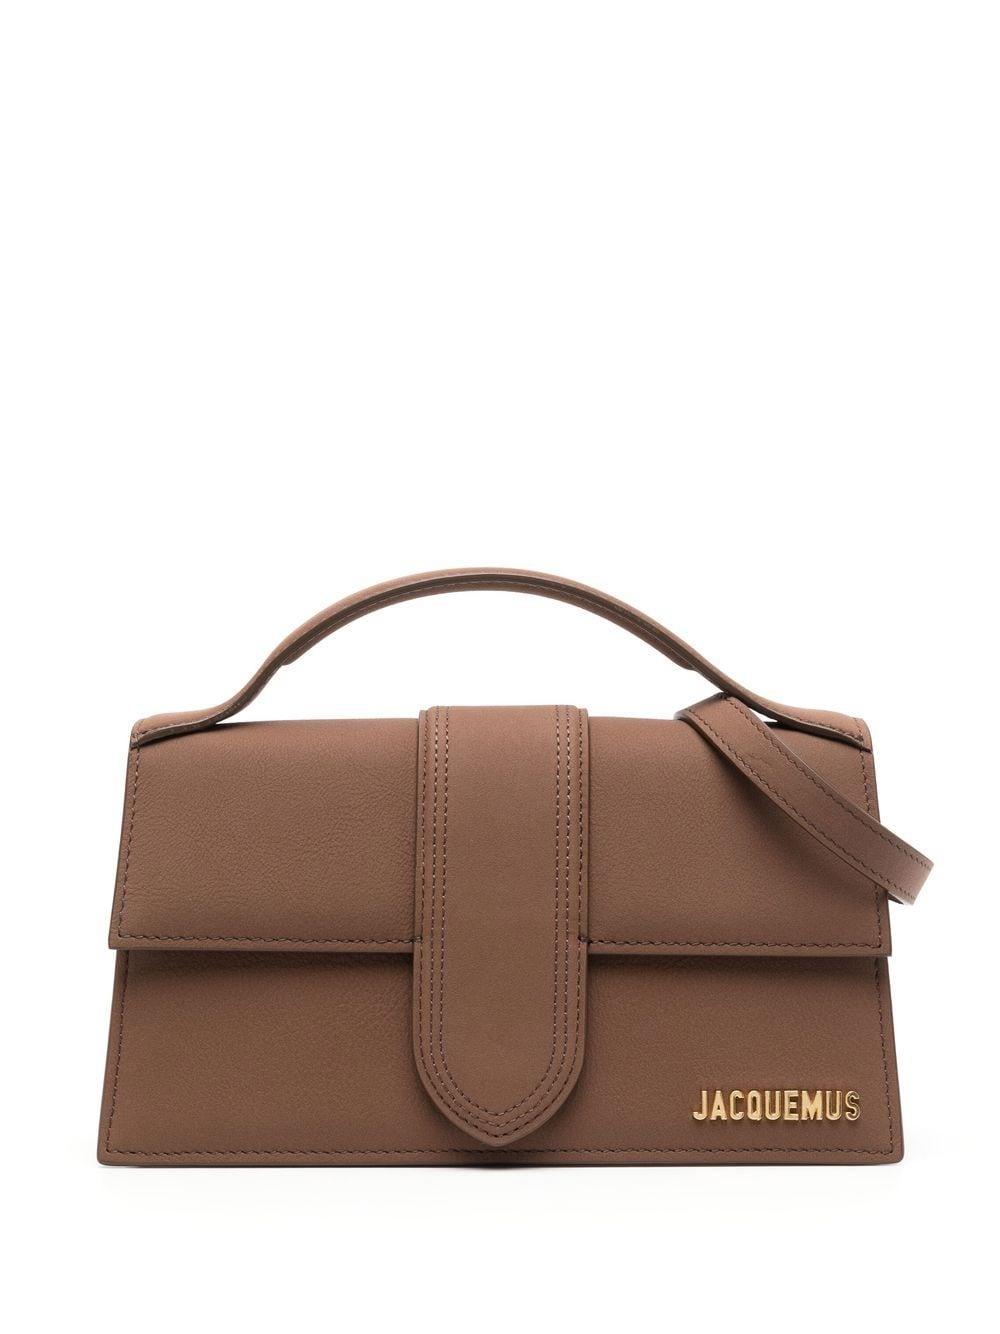 Jacquemus Le Grand Bambino Bag in Brown | Lyst